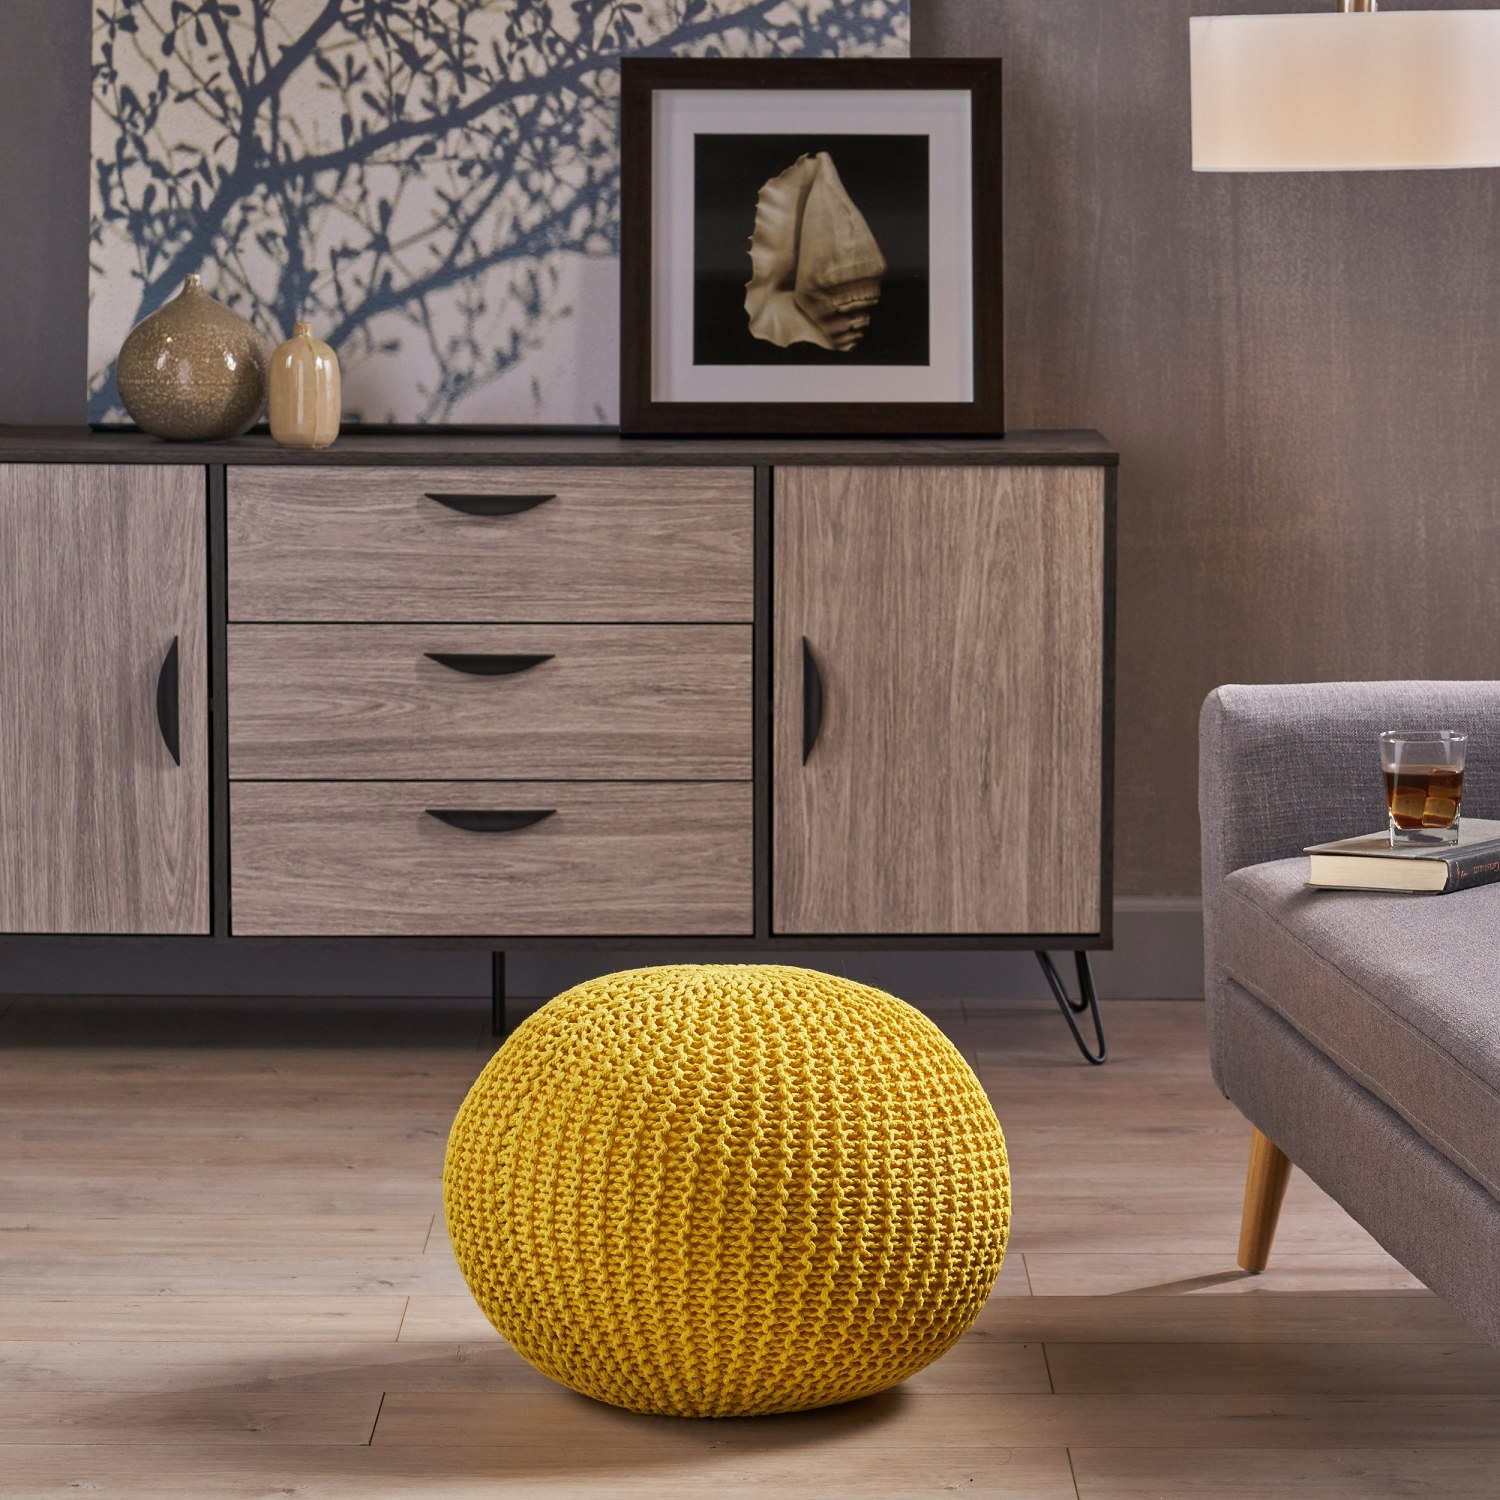 The pouf placed in front of a couch